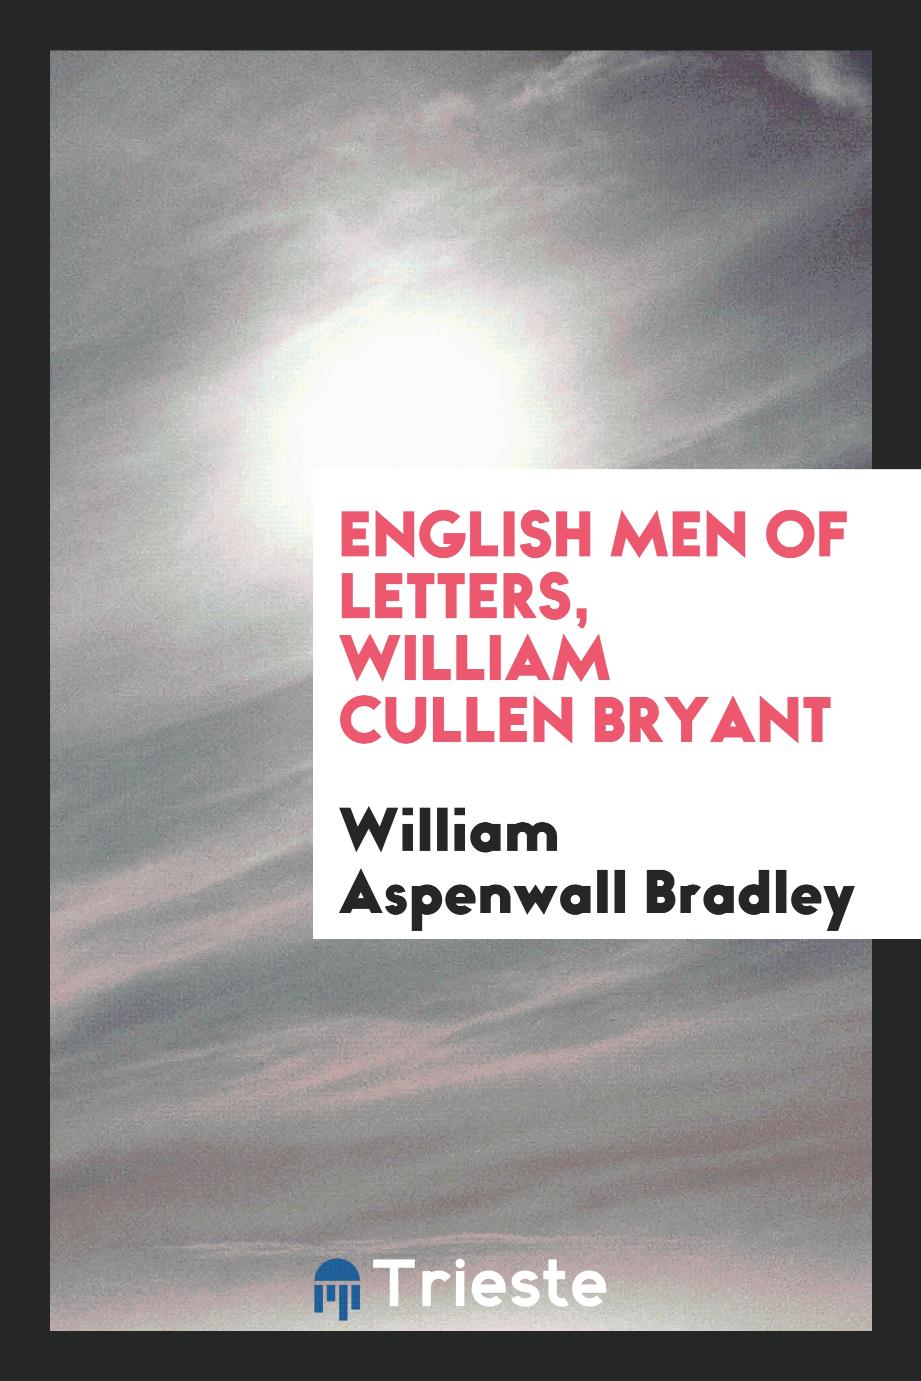 English men of letters, William Cullen Bryant